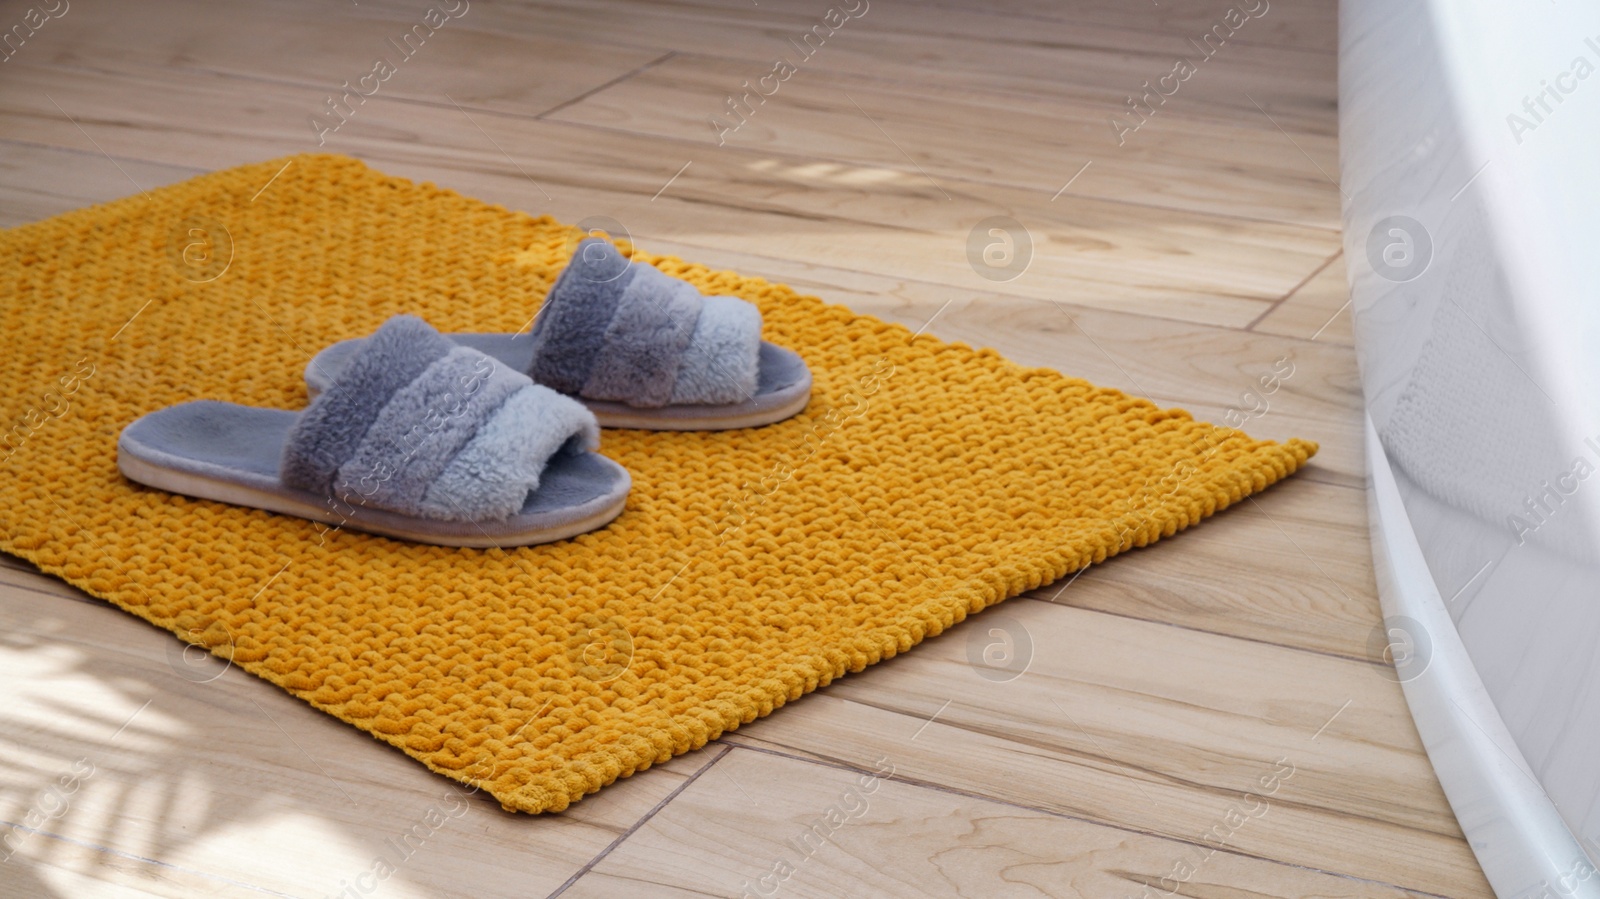 Photo of Soft bath mat with slippers near tub on wooden floor in bathroom